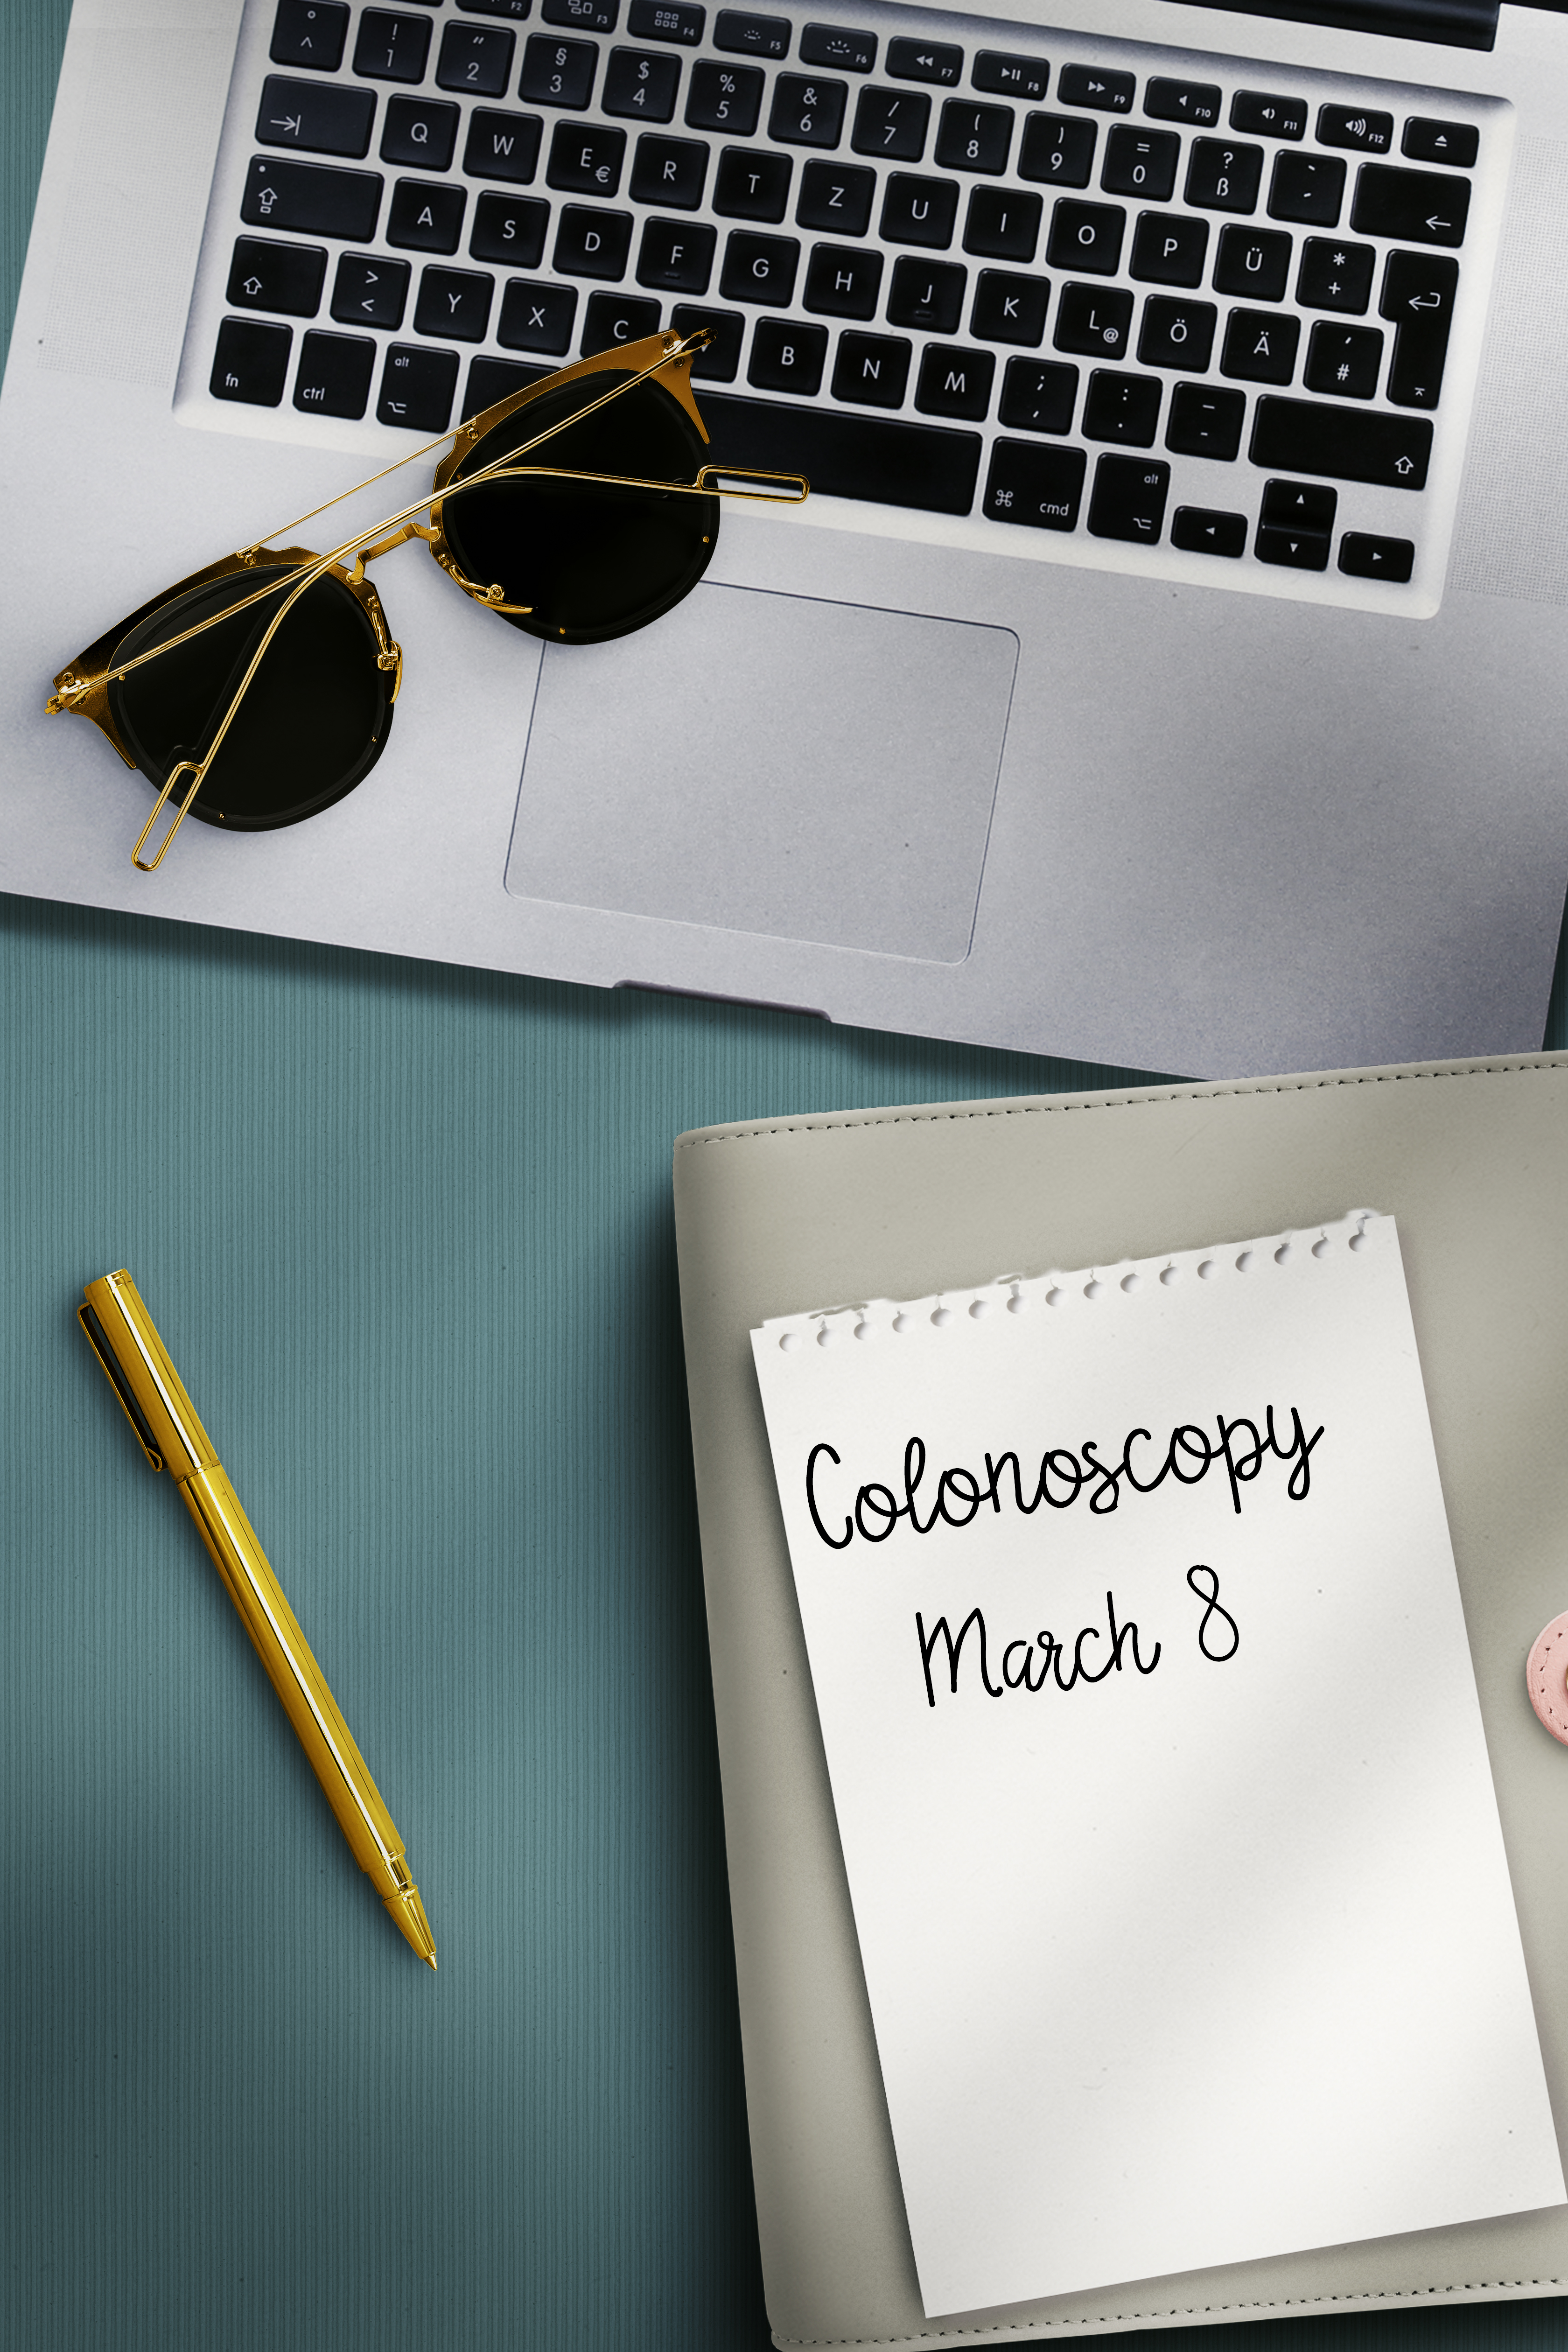 Notepad with handwritten &#x27;Colonoscopy March 8&#x27; beside laptop, sunglasses, and pen